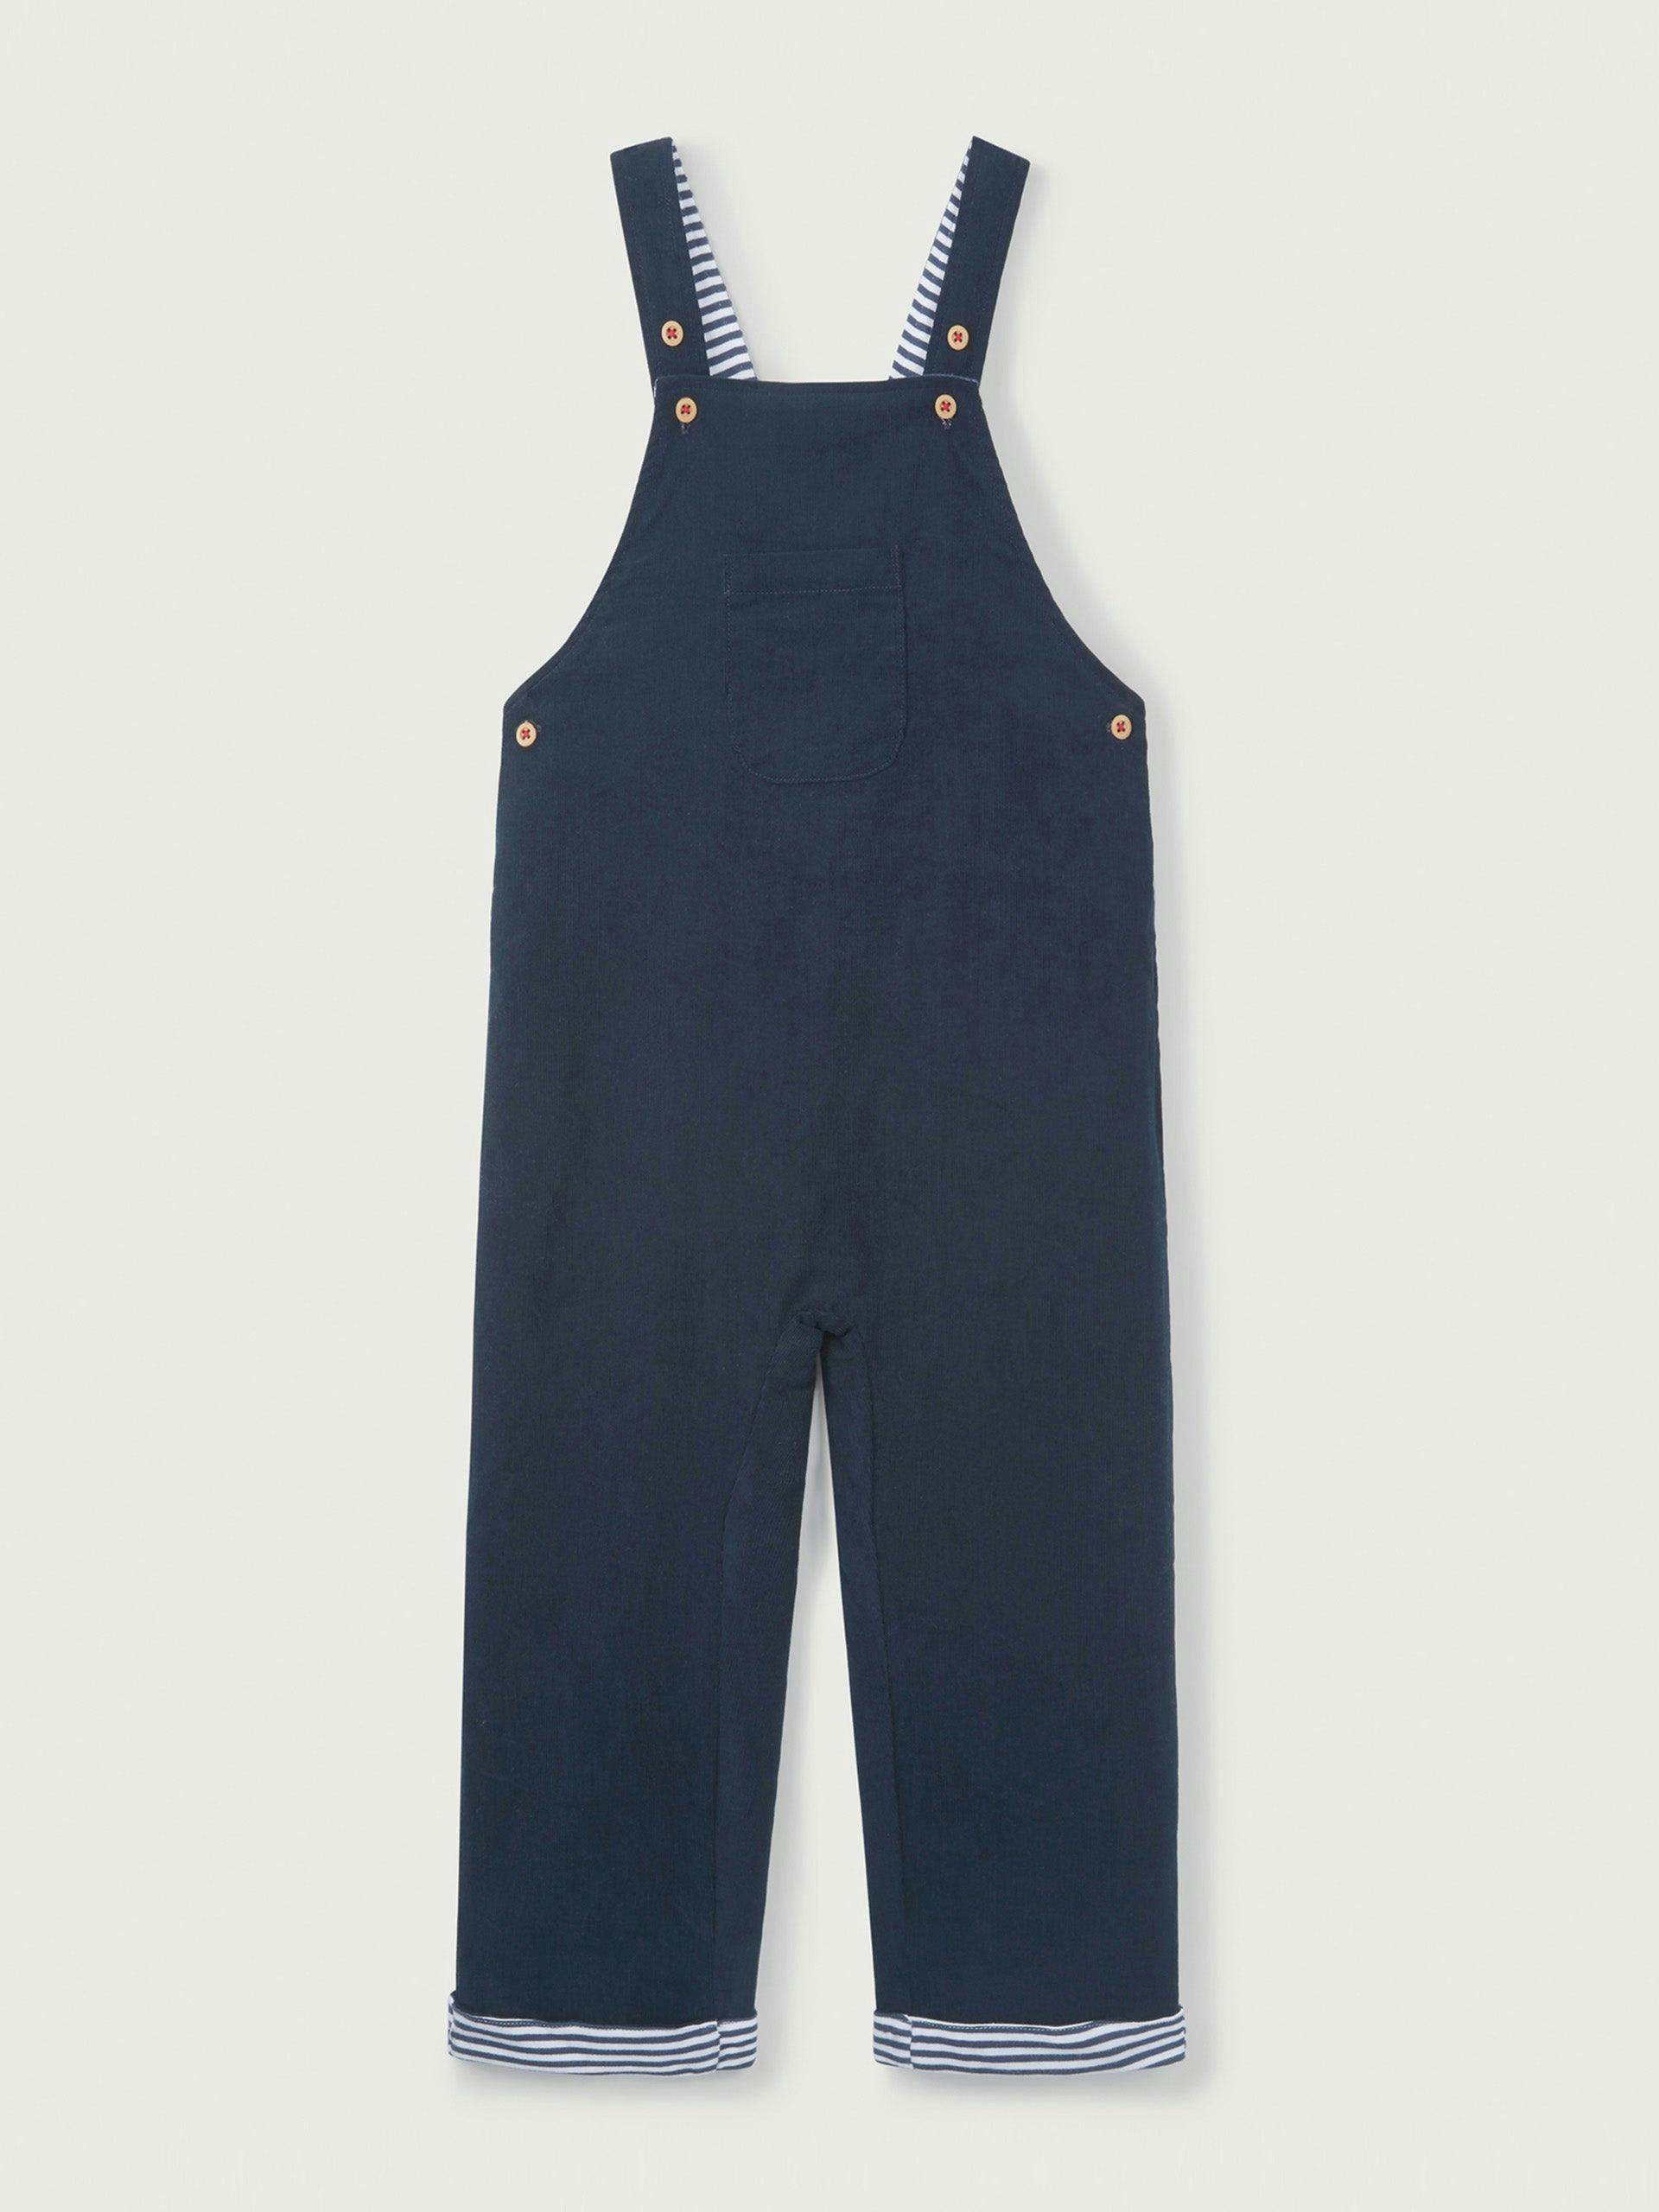 Navy cord dungarees